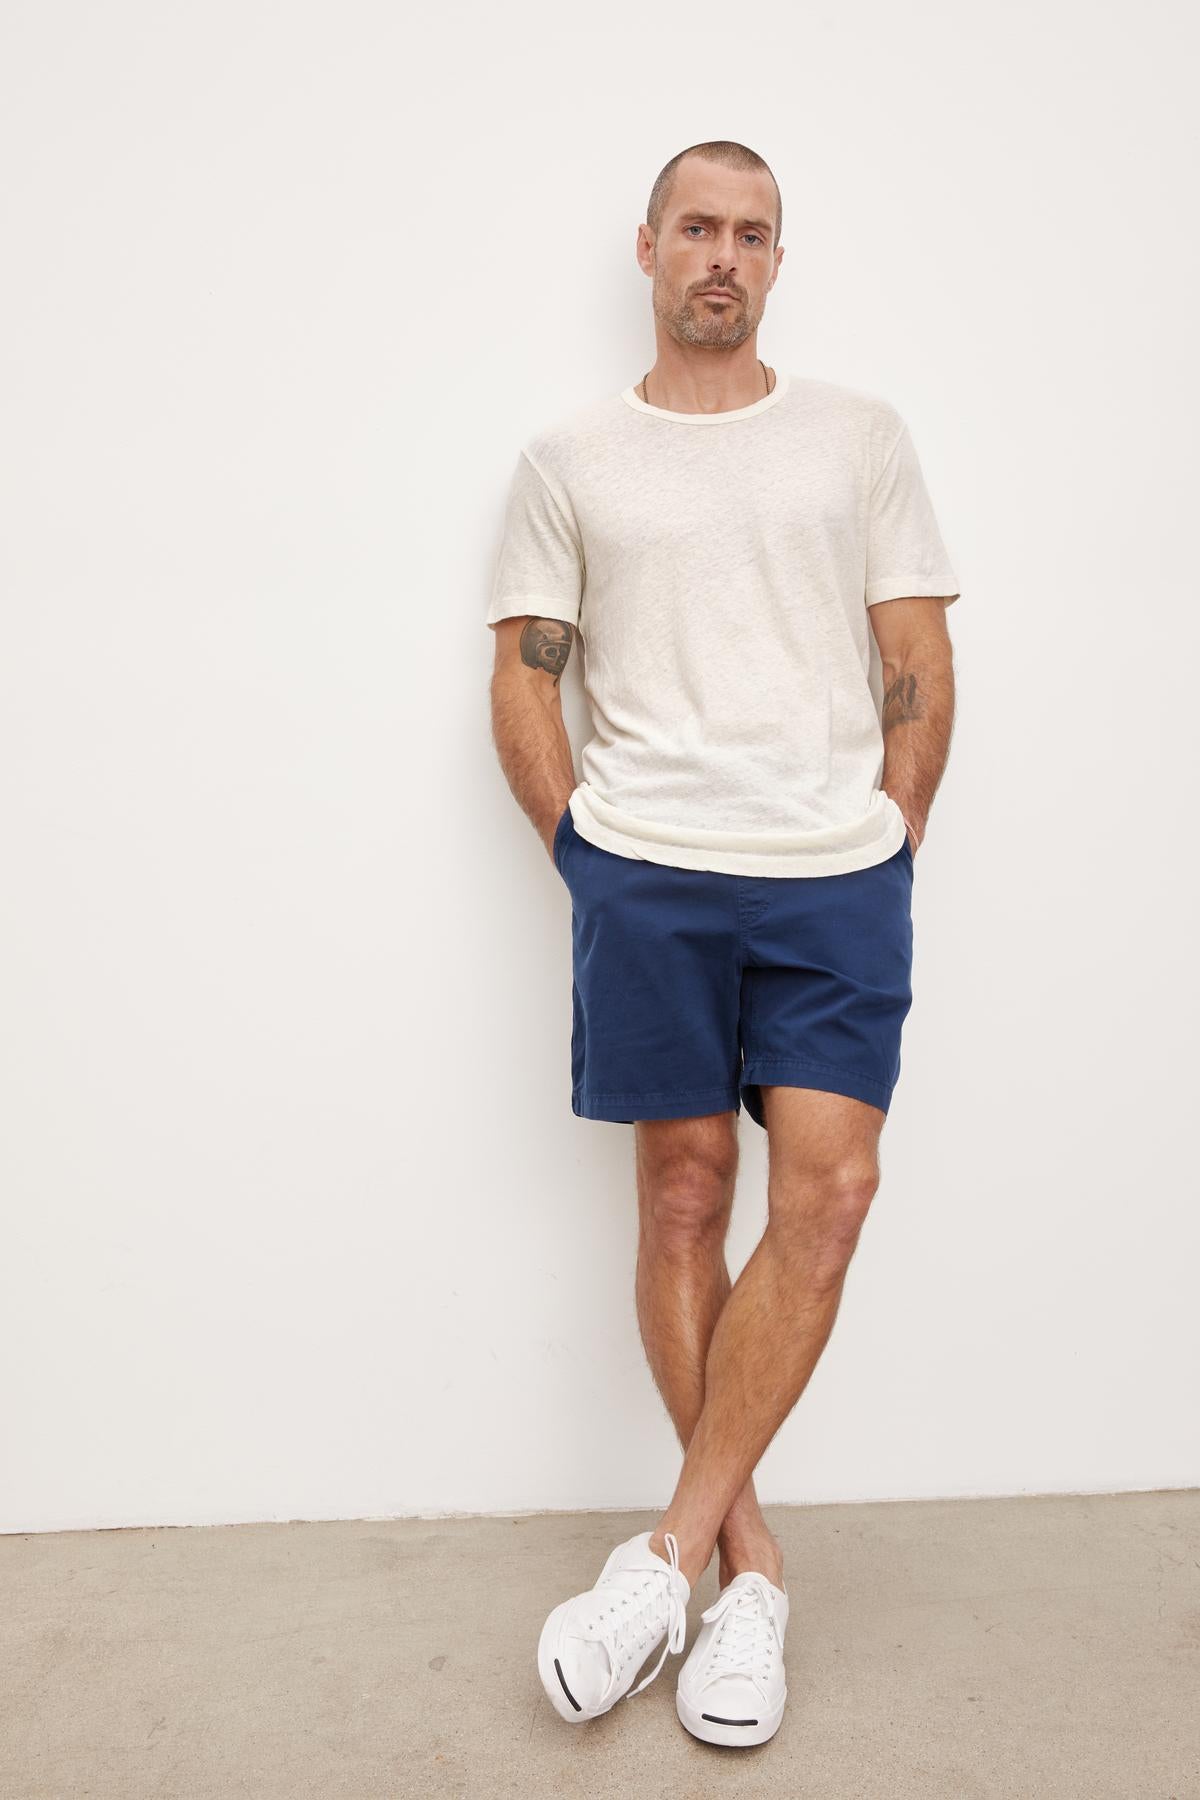 A man standing against a plain background, wearing a Velvet by Graham & Spencer Davey Tee, blue shorts, and white sneakers, with his right leg crossed over his left.-36732521414849